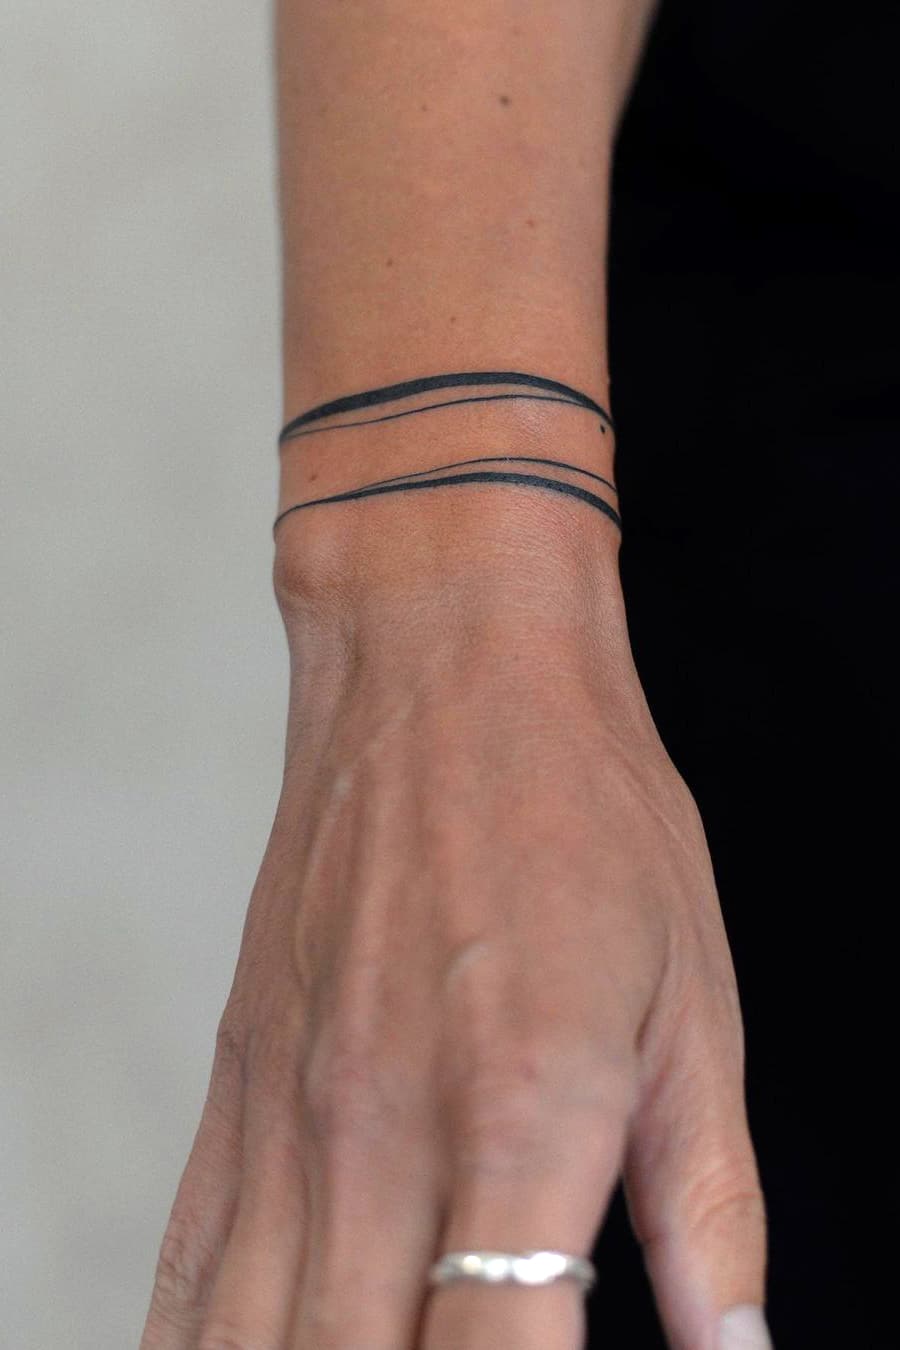 Abstract parallel line armband tattoo